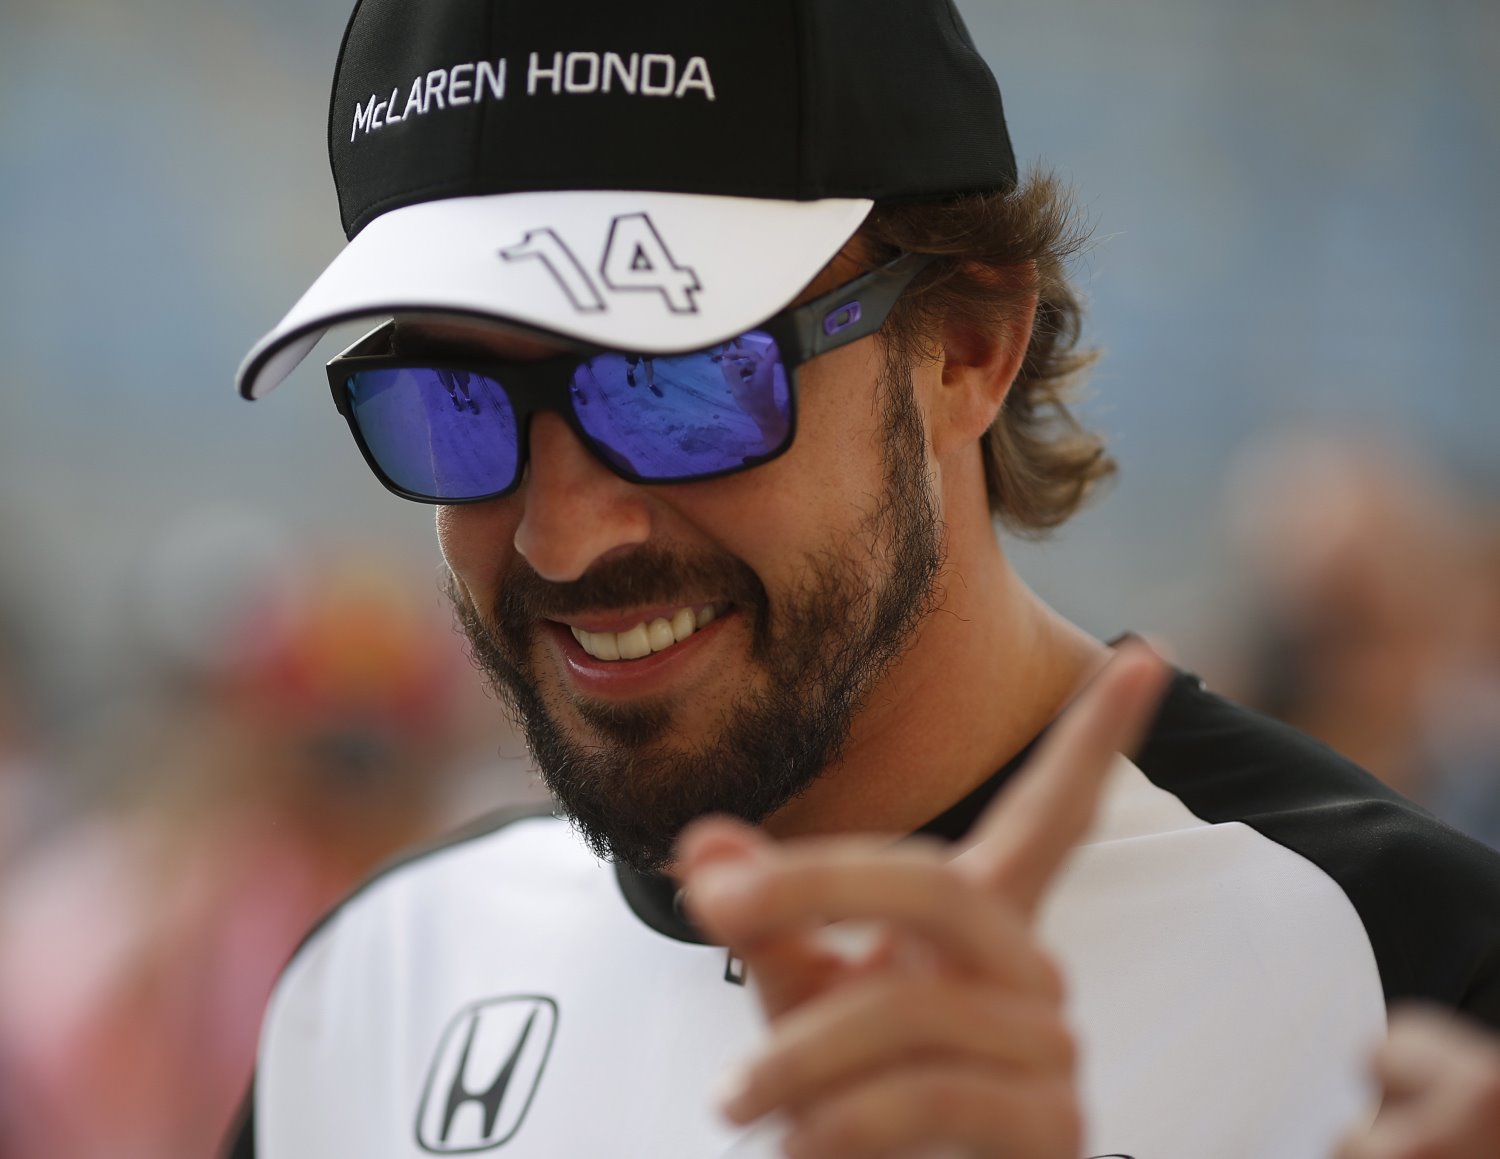 The car is 99% of the equation in F1. With the McLaren-Honda Fernando Alonso is now a backmarker